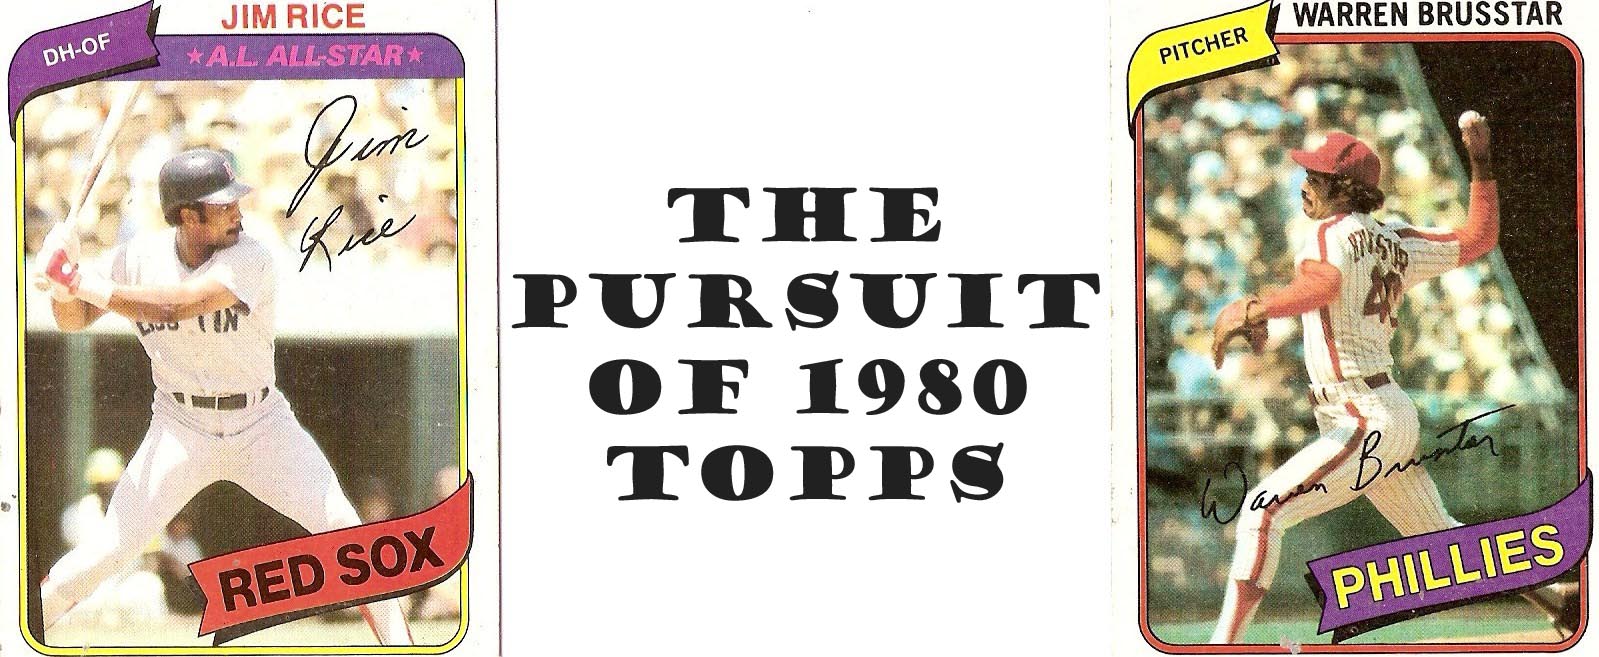 The pursuit of 1980 Topps